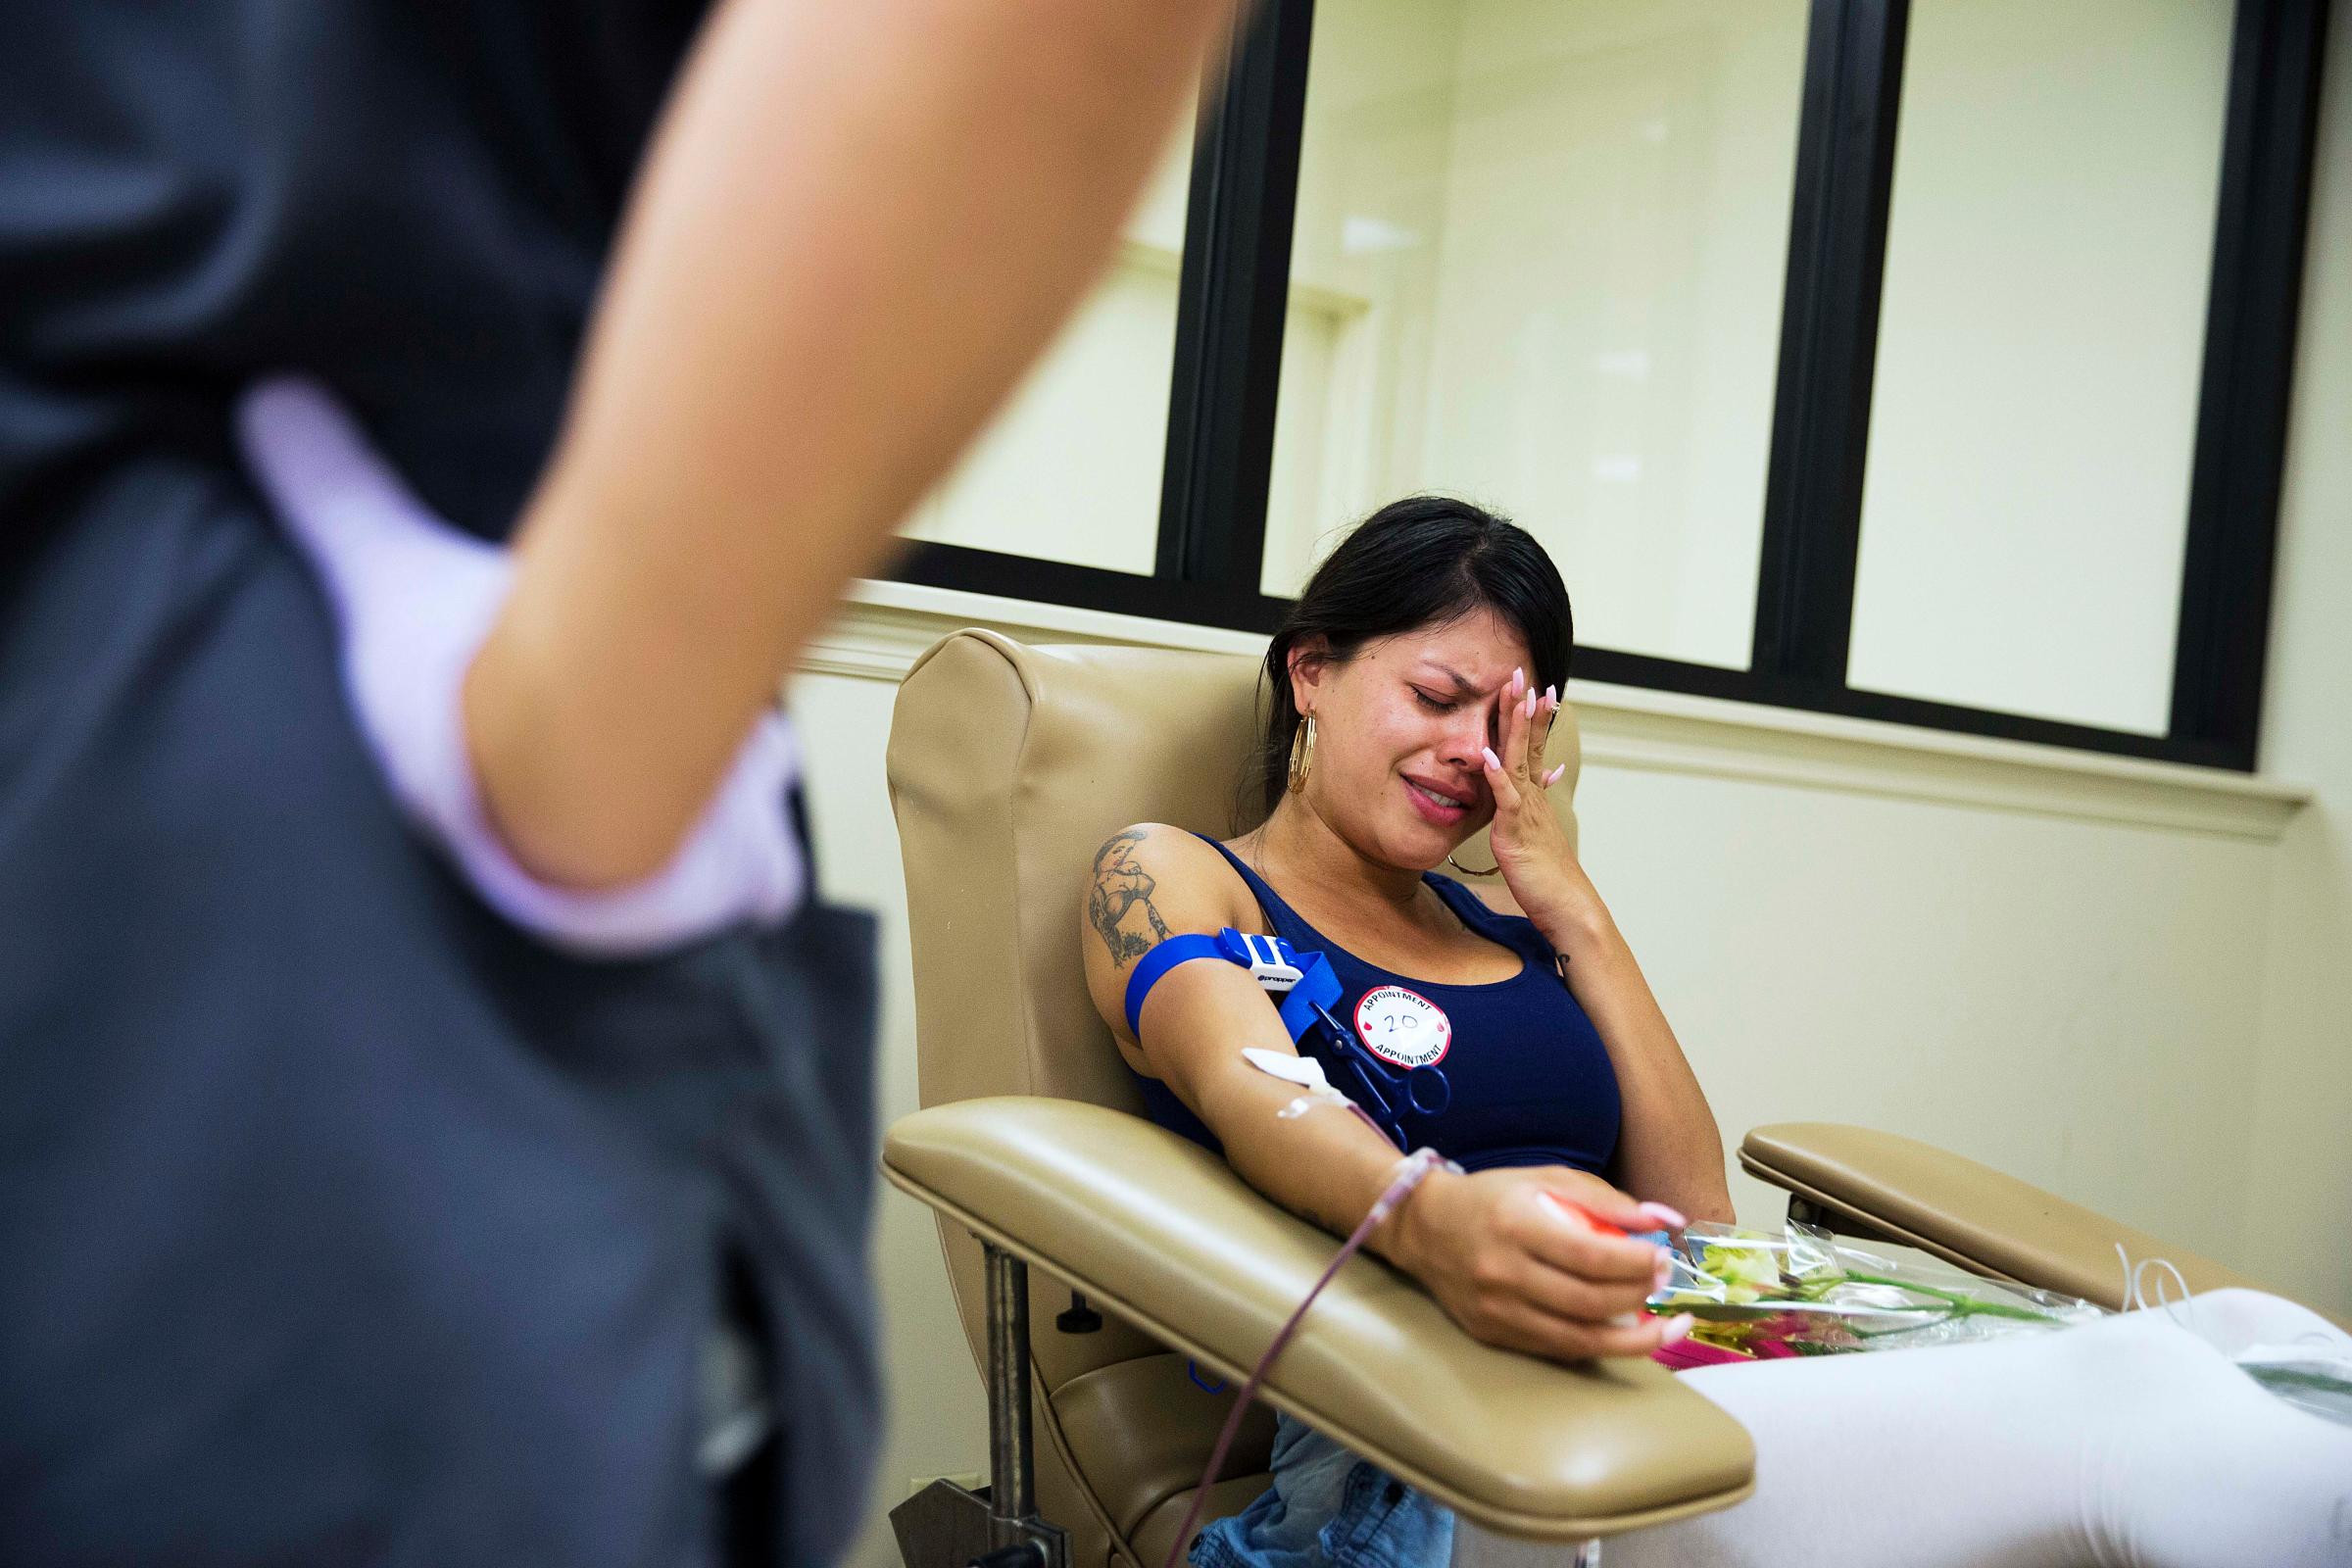 Tatiana Osorio cries while giving blood at the OneBlood blood center near the mass shooting at a nightclub in Orlando, Fla., on June 13, 2016. Osorio lost three friends in the shooting.